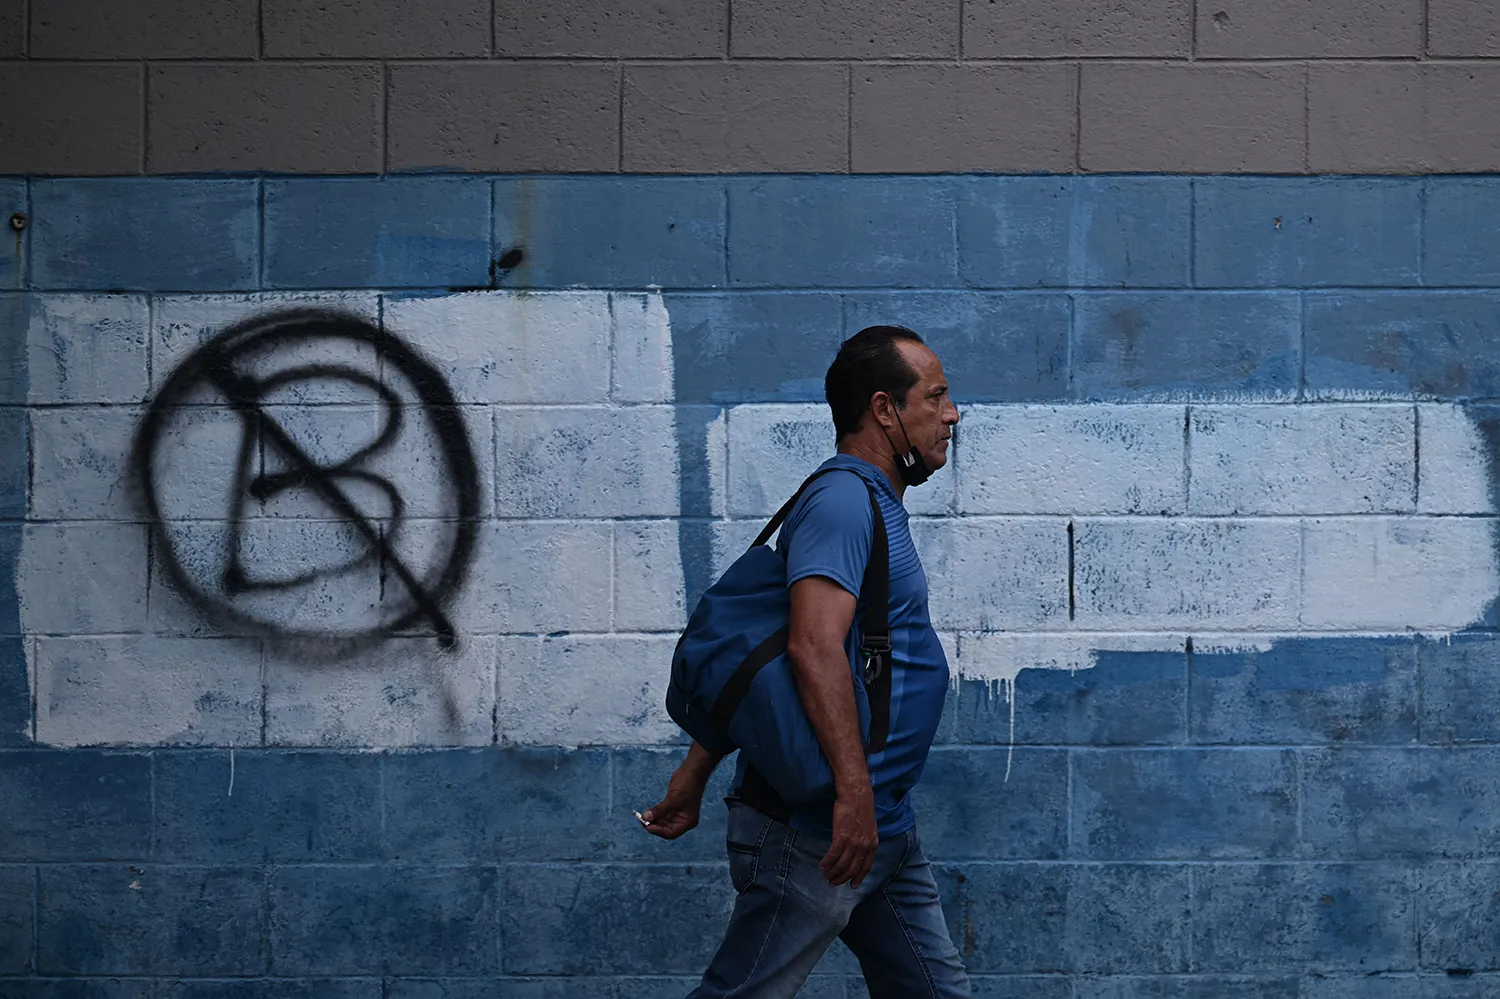 A man in a T-shirt with a face mask around his chin and carrying a backpack walks past a cinderblock wall that has been spray-painted with an anti-bitcoin symbol showing a crossed out letter "B."